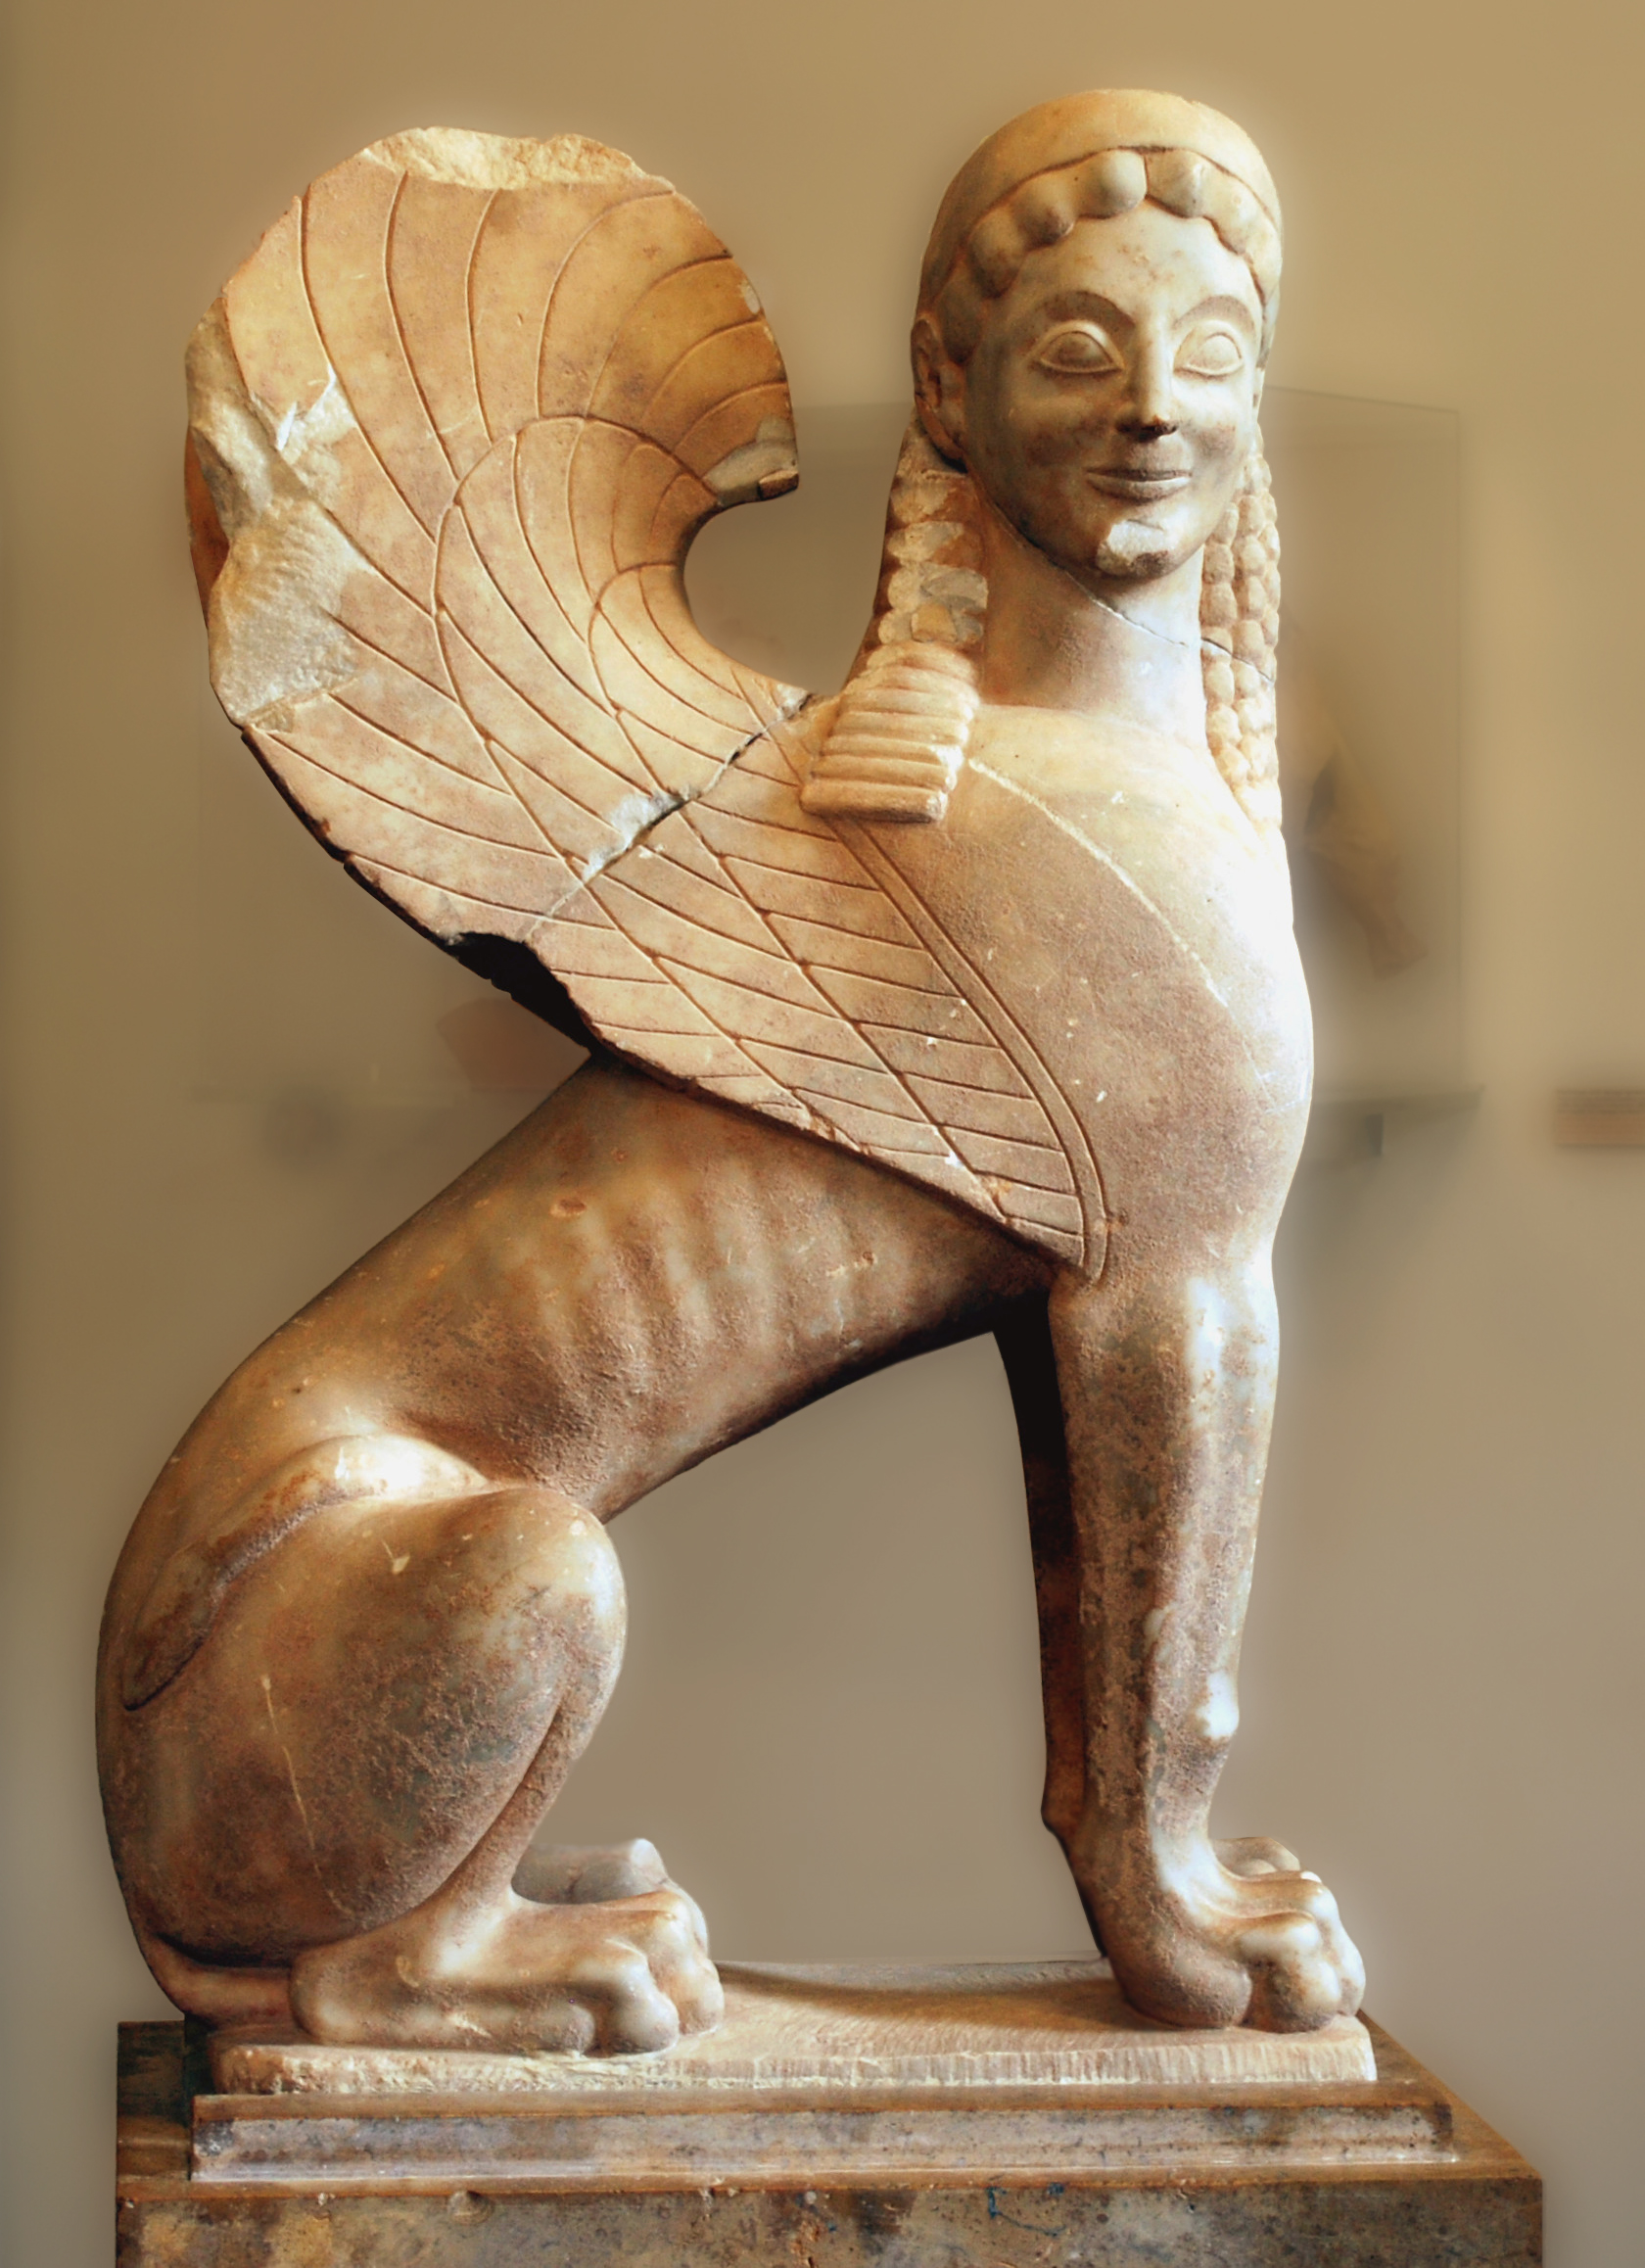 Classical Greek sphinx in the Corinth Archaeological Museum. Photo taken on April 9, 2010.